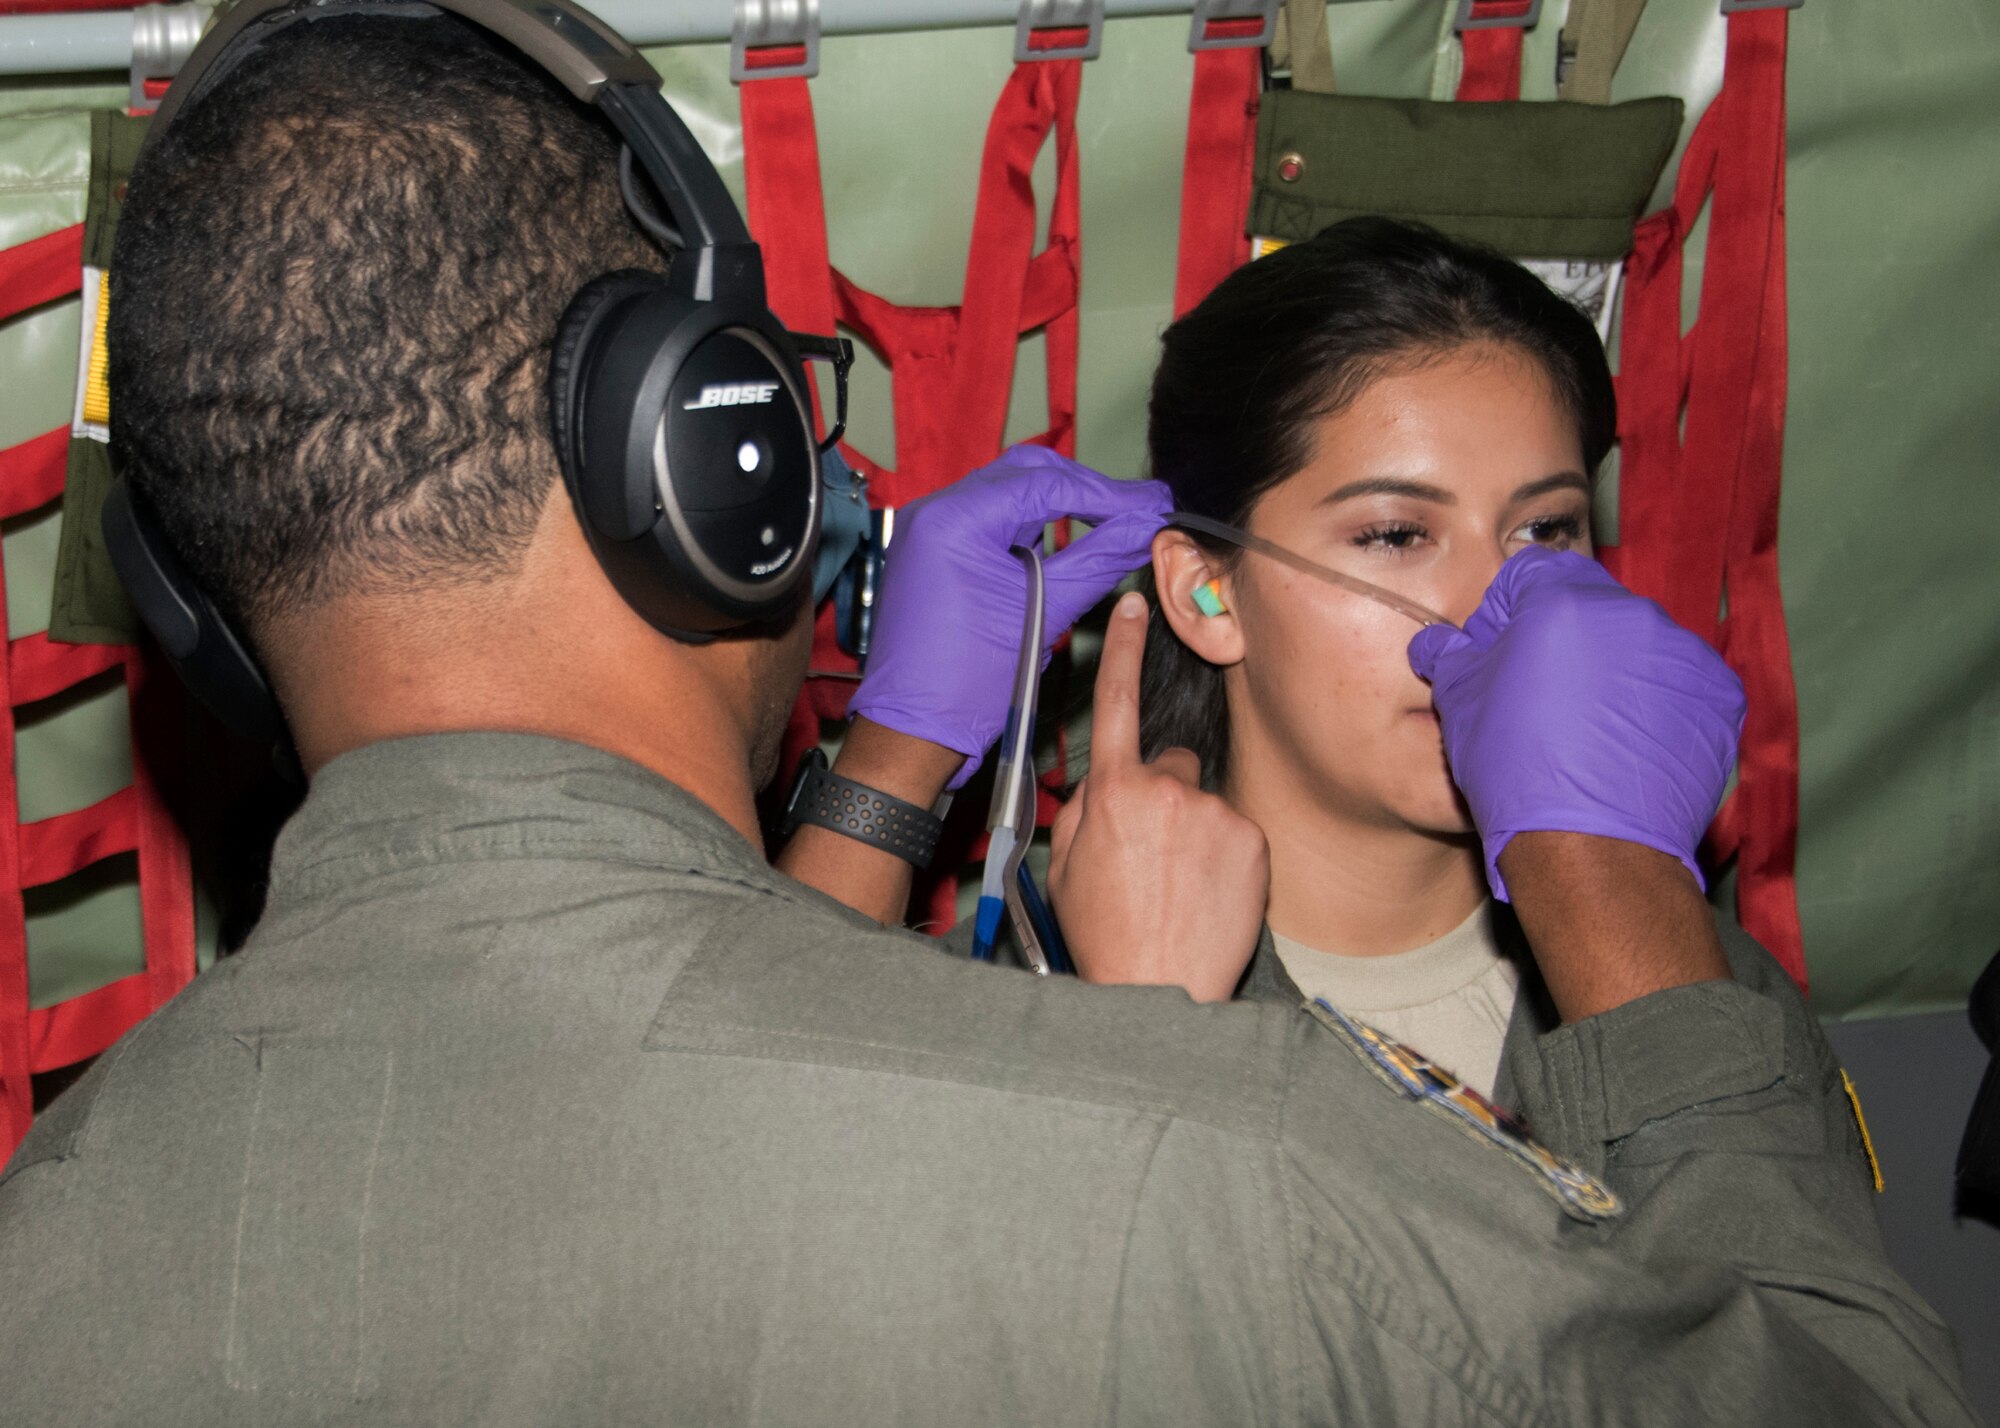 Senior Airman Jesse McNeal, 459th Aeromedical Evacuation Squadron, flight medic, simulates inserting a nasal gastric tube onto Senior Airman Maria Moposita during an off station trainer on a KC-135 Stratotanker Sept. 20, 2019. The AES team conducted training during a flight to Wright Patterson, Ohio, where they later participated in the Air Force Marathon. (U.S. Air Force photo by Staff Sgt. Cierra Presentado/Released)